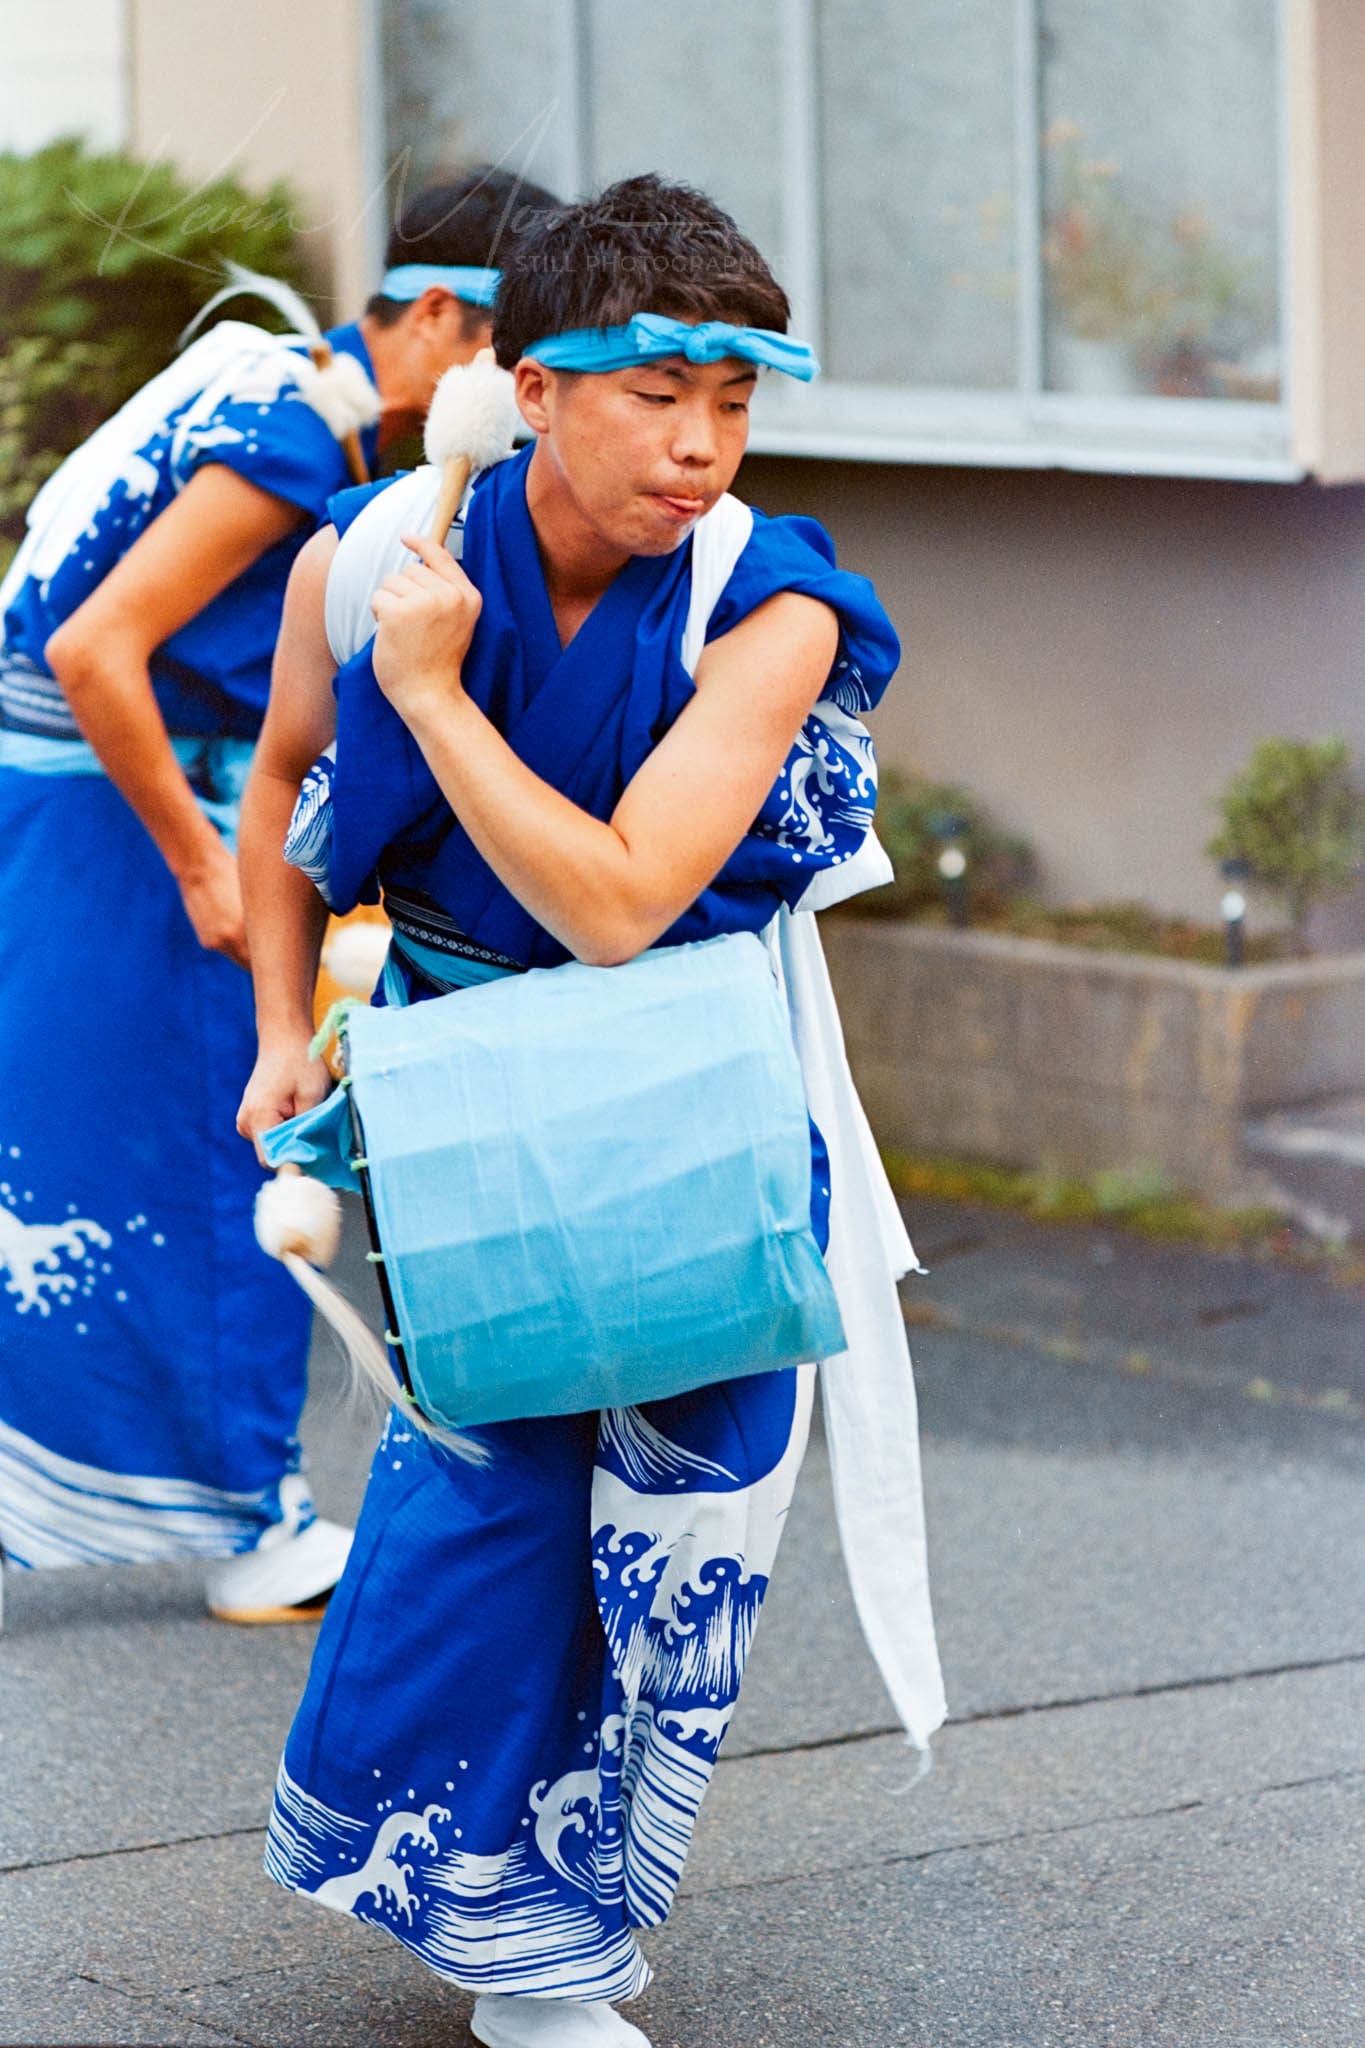 Taiko drummer in traditional Japanese attire performing at an outdoor festival